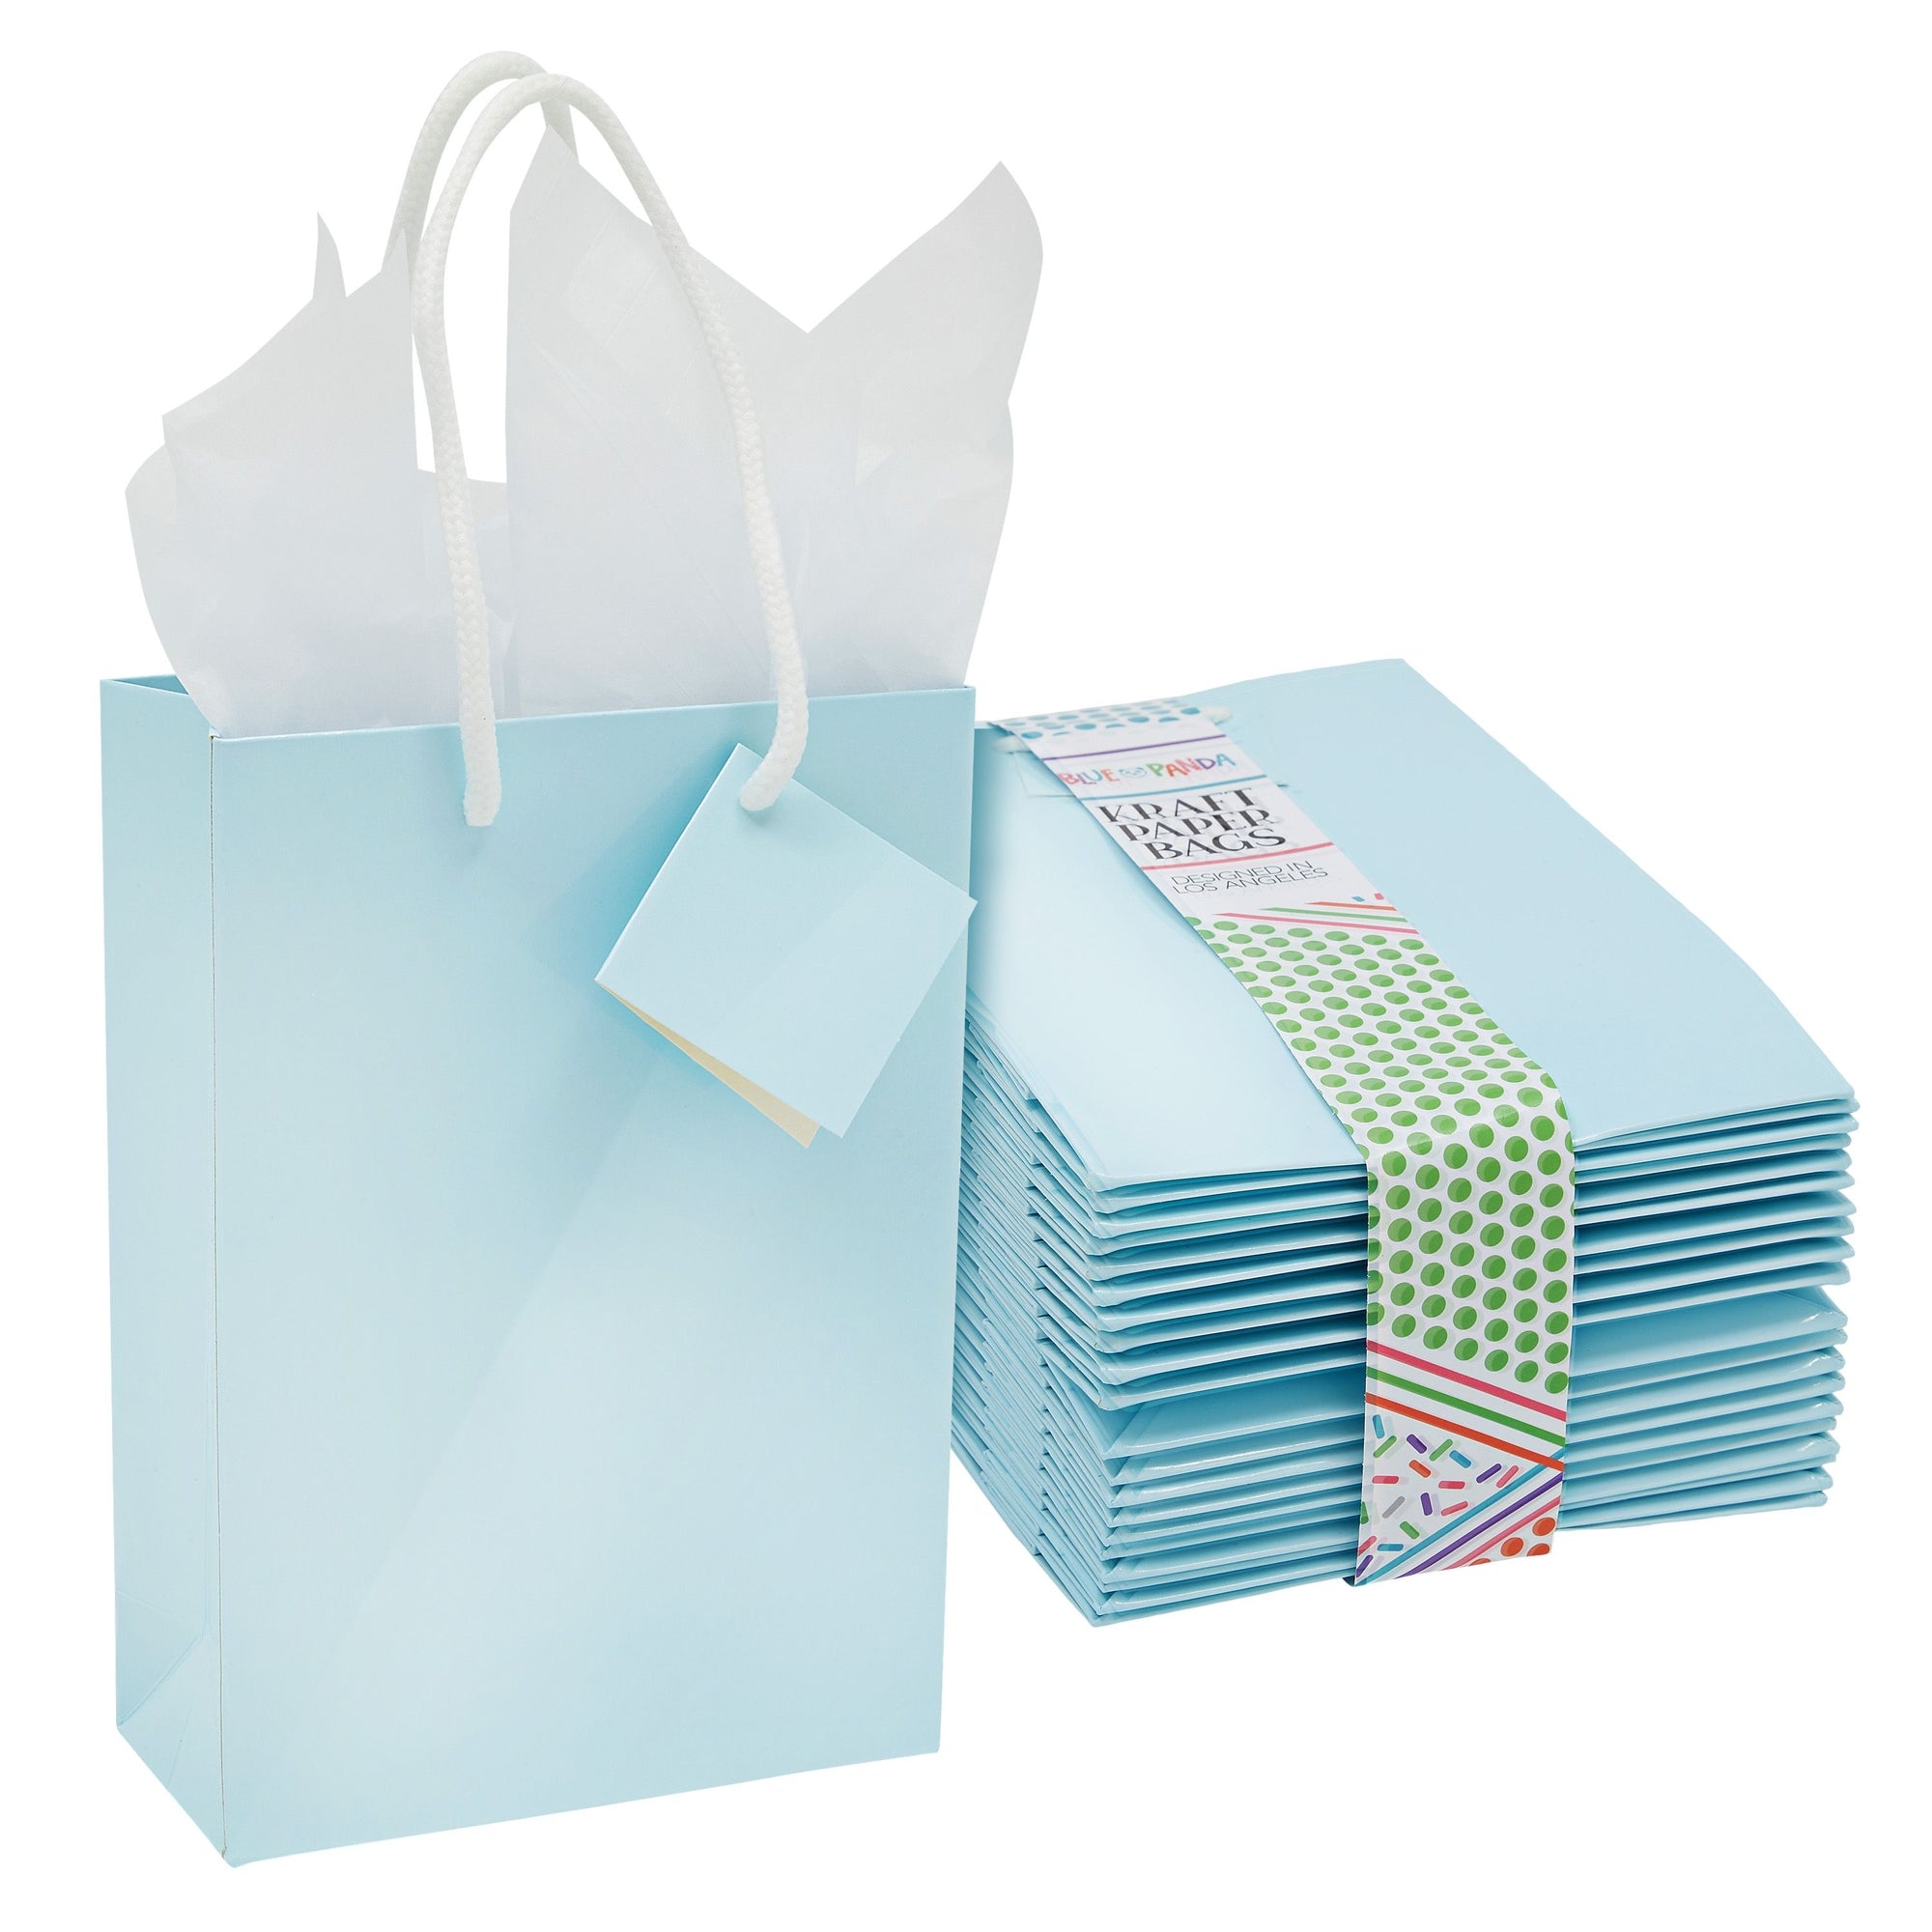 20-Pack Small Paper Gift Bags with Handles, 5.5x2.5x7.9-Inch Goodie Bags  with 20 Sheets White Tissue Paper and 20 Hang Tags for Small Business (Green)